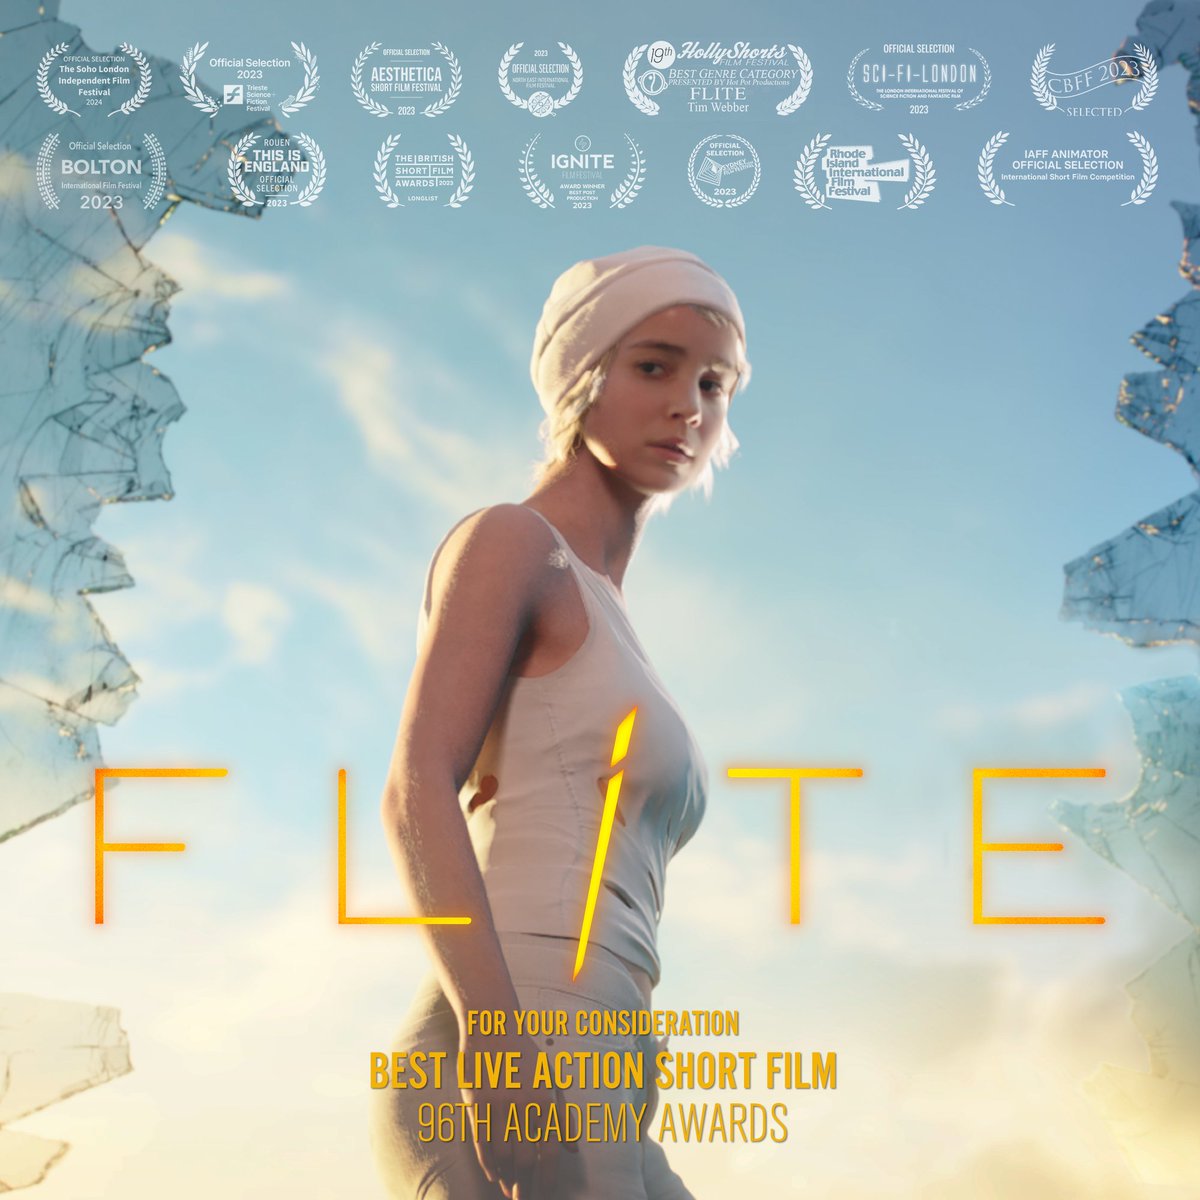 FLITE is available in The Academy Screening Room #FYC, you can also tune in to the short film's YouTube premiere on December 1.

Directed by Tim Webber, FLITE stars @albabaptista_, Gethin Anthony and Daniel Lawrence Taylor.
#Oscars #liveactionshortfilm #albabaptista #premiere